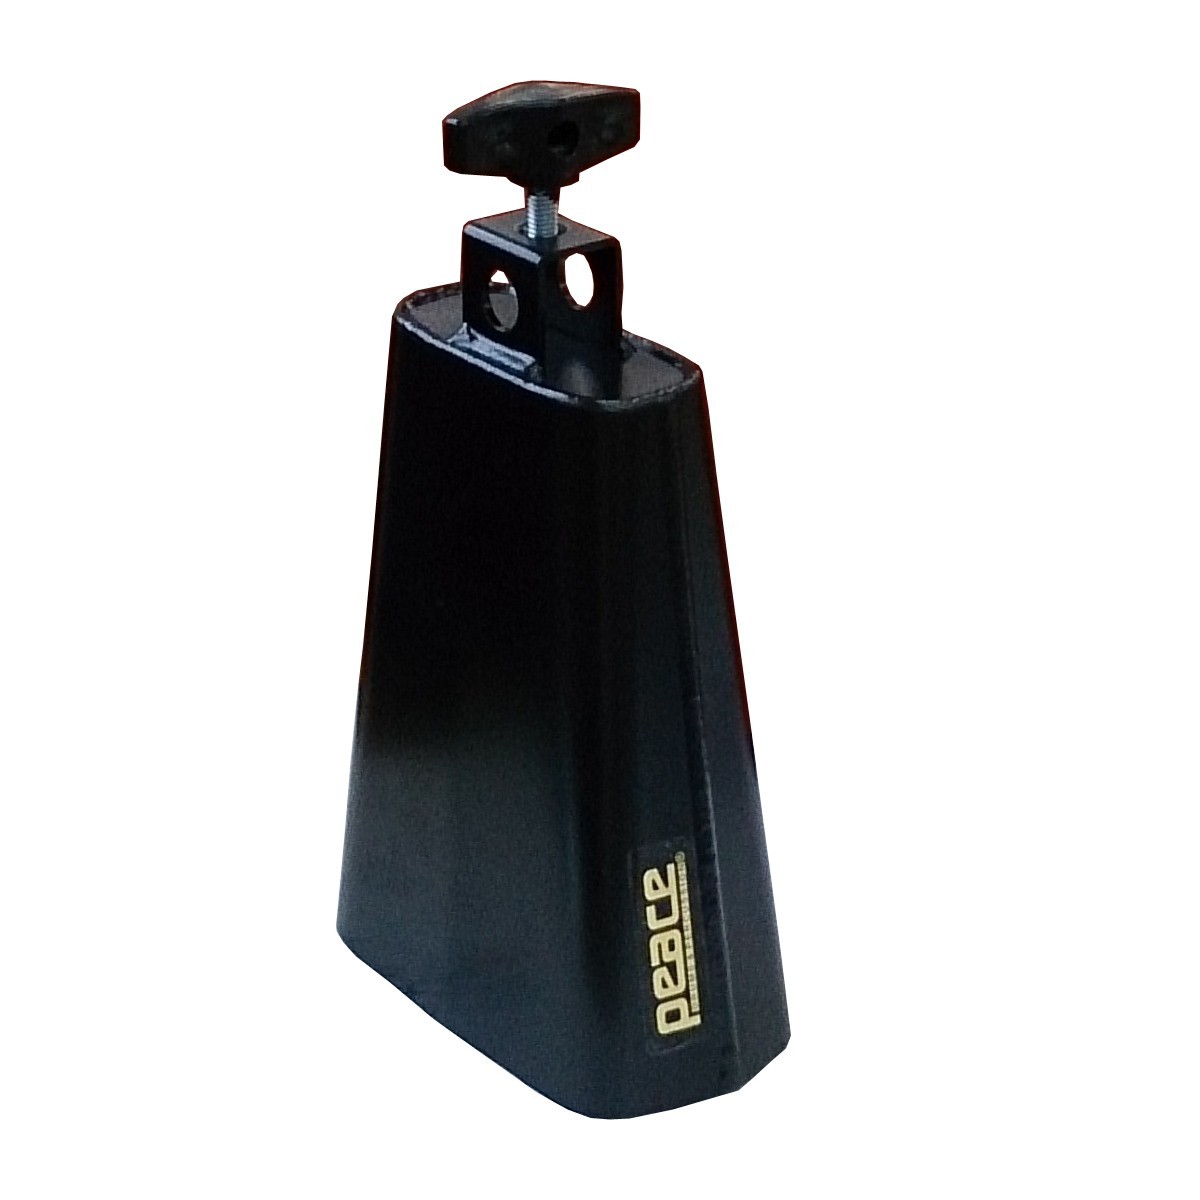 COW BELL PEACE CB-2  5.5